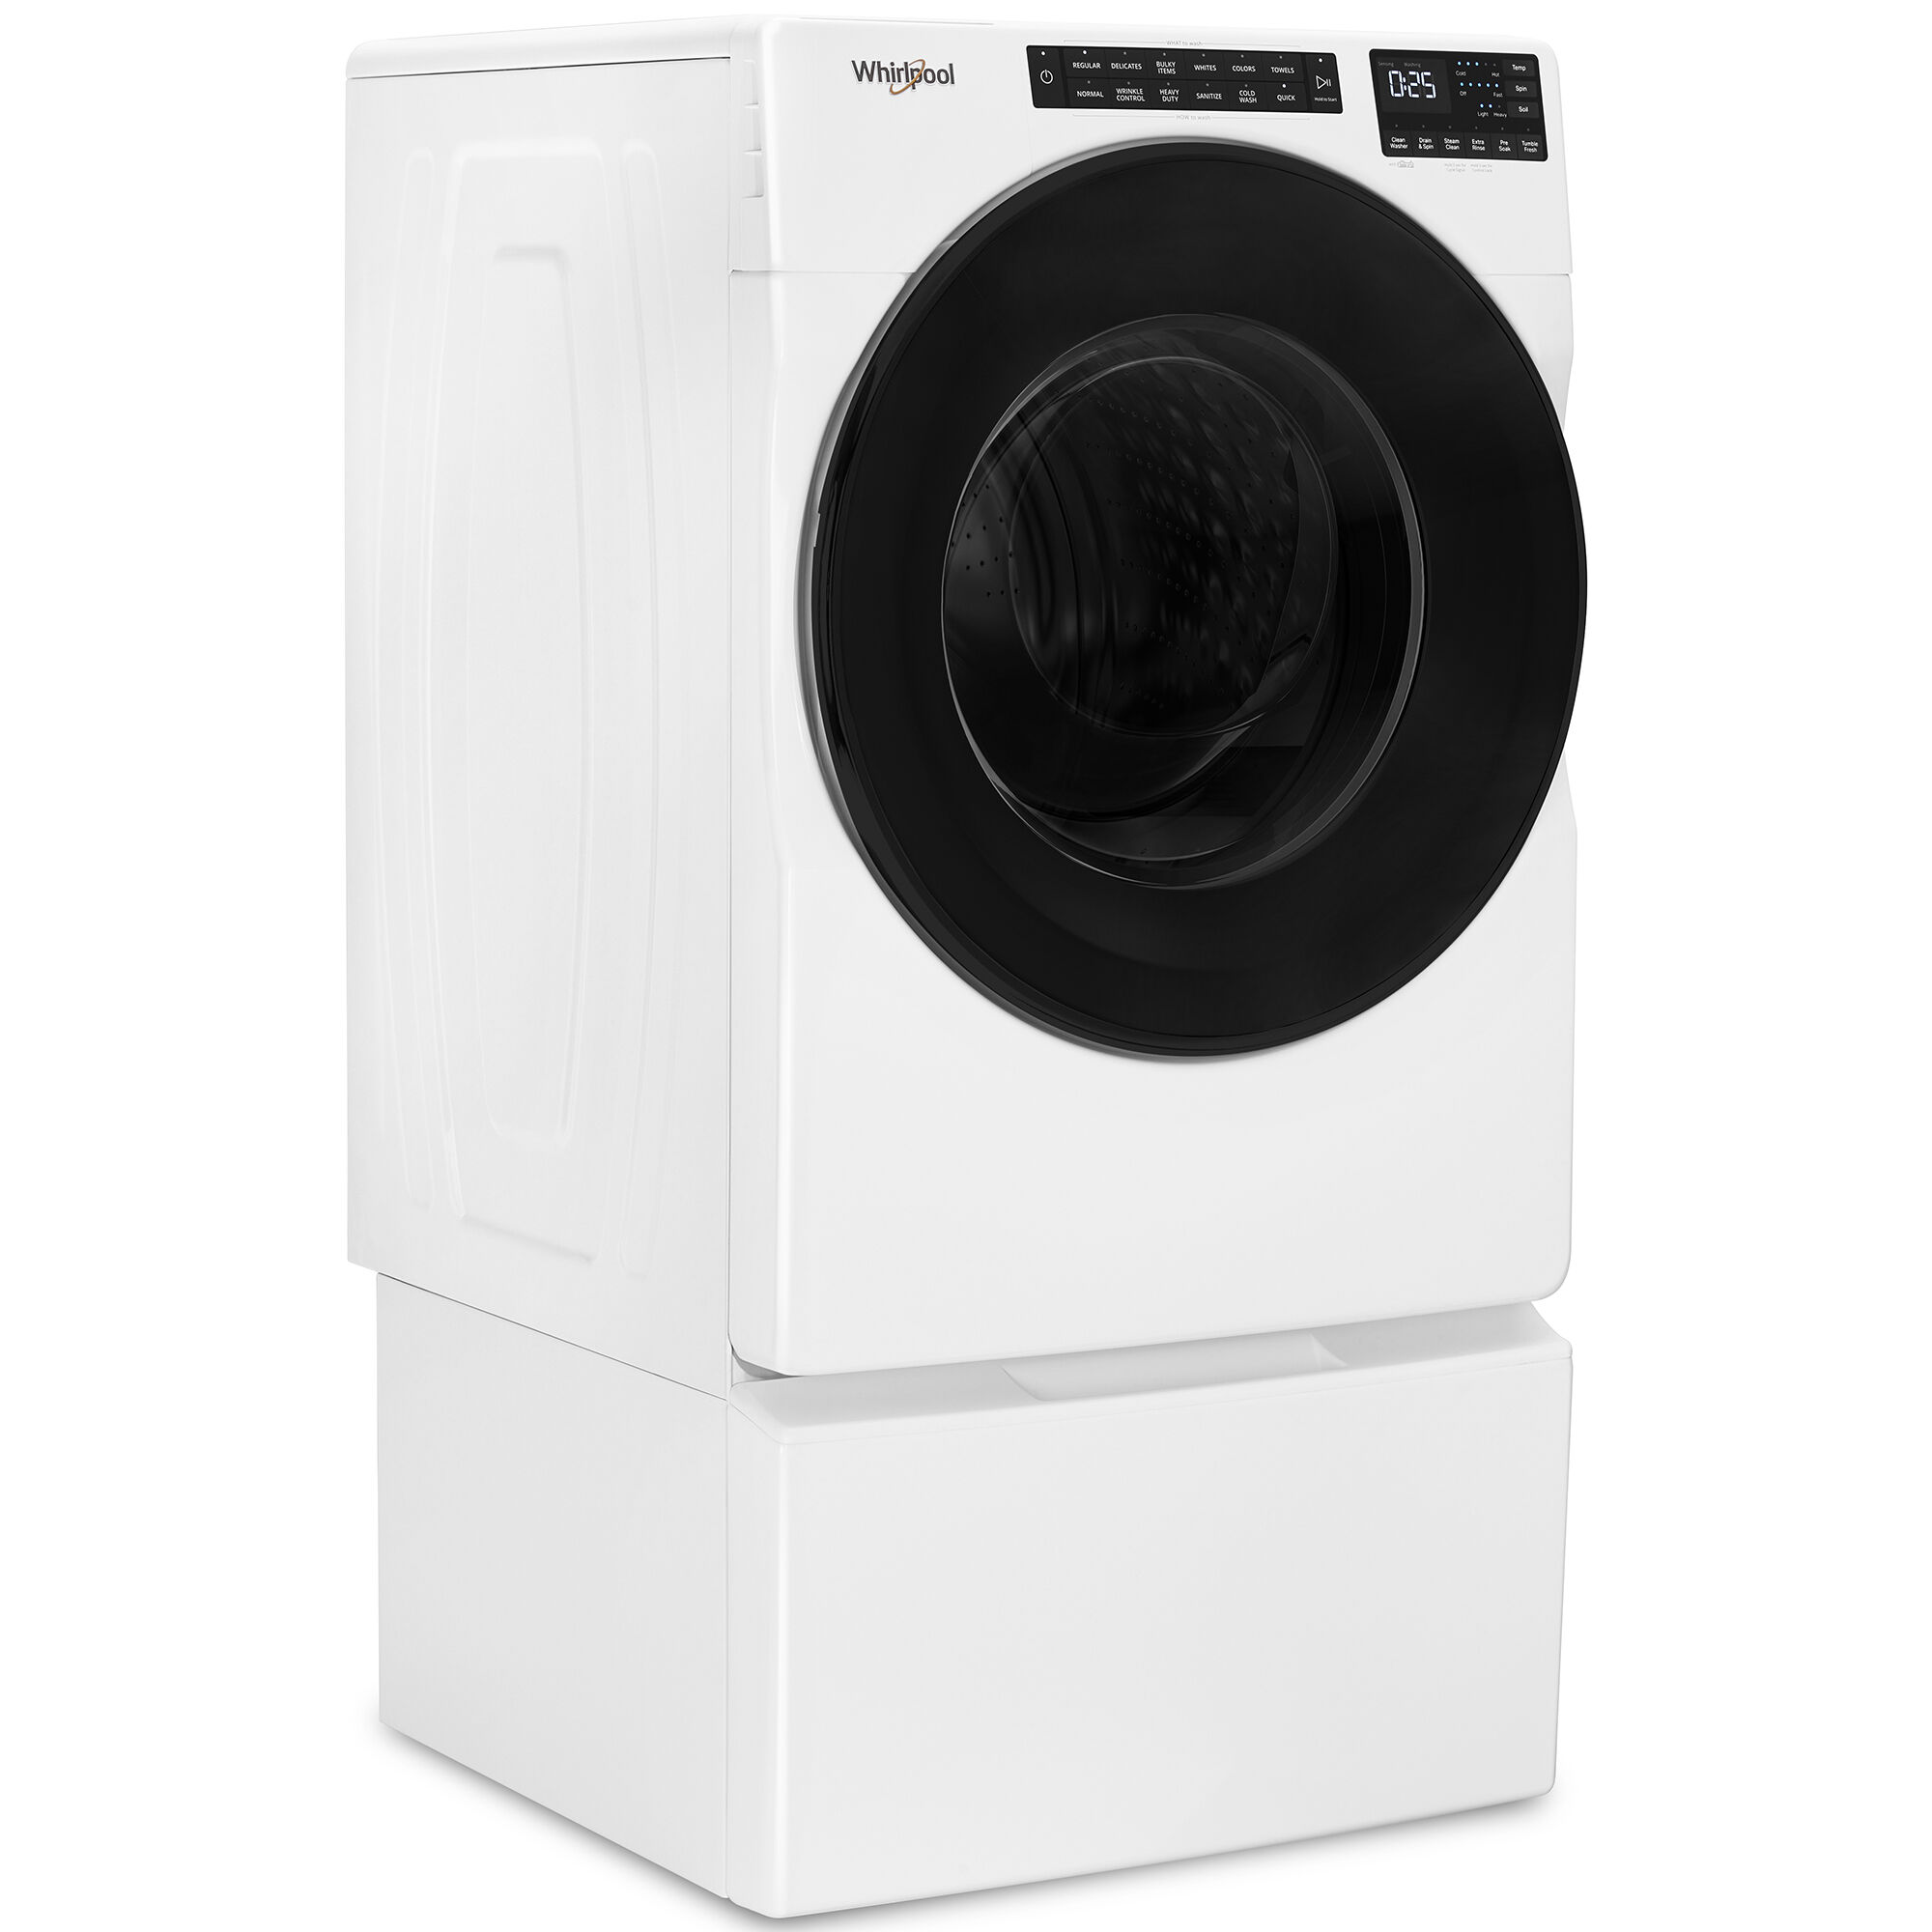 Whirlpool 27 in. 4.5 cu. ft. Stackable Front Load Washer with Sanitize,  Steam & Quick Wash Cycles - White